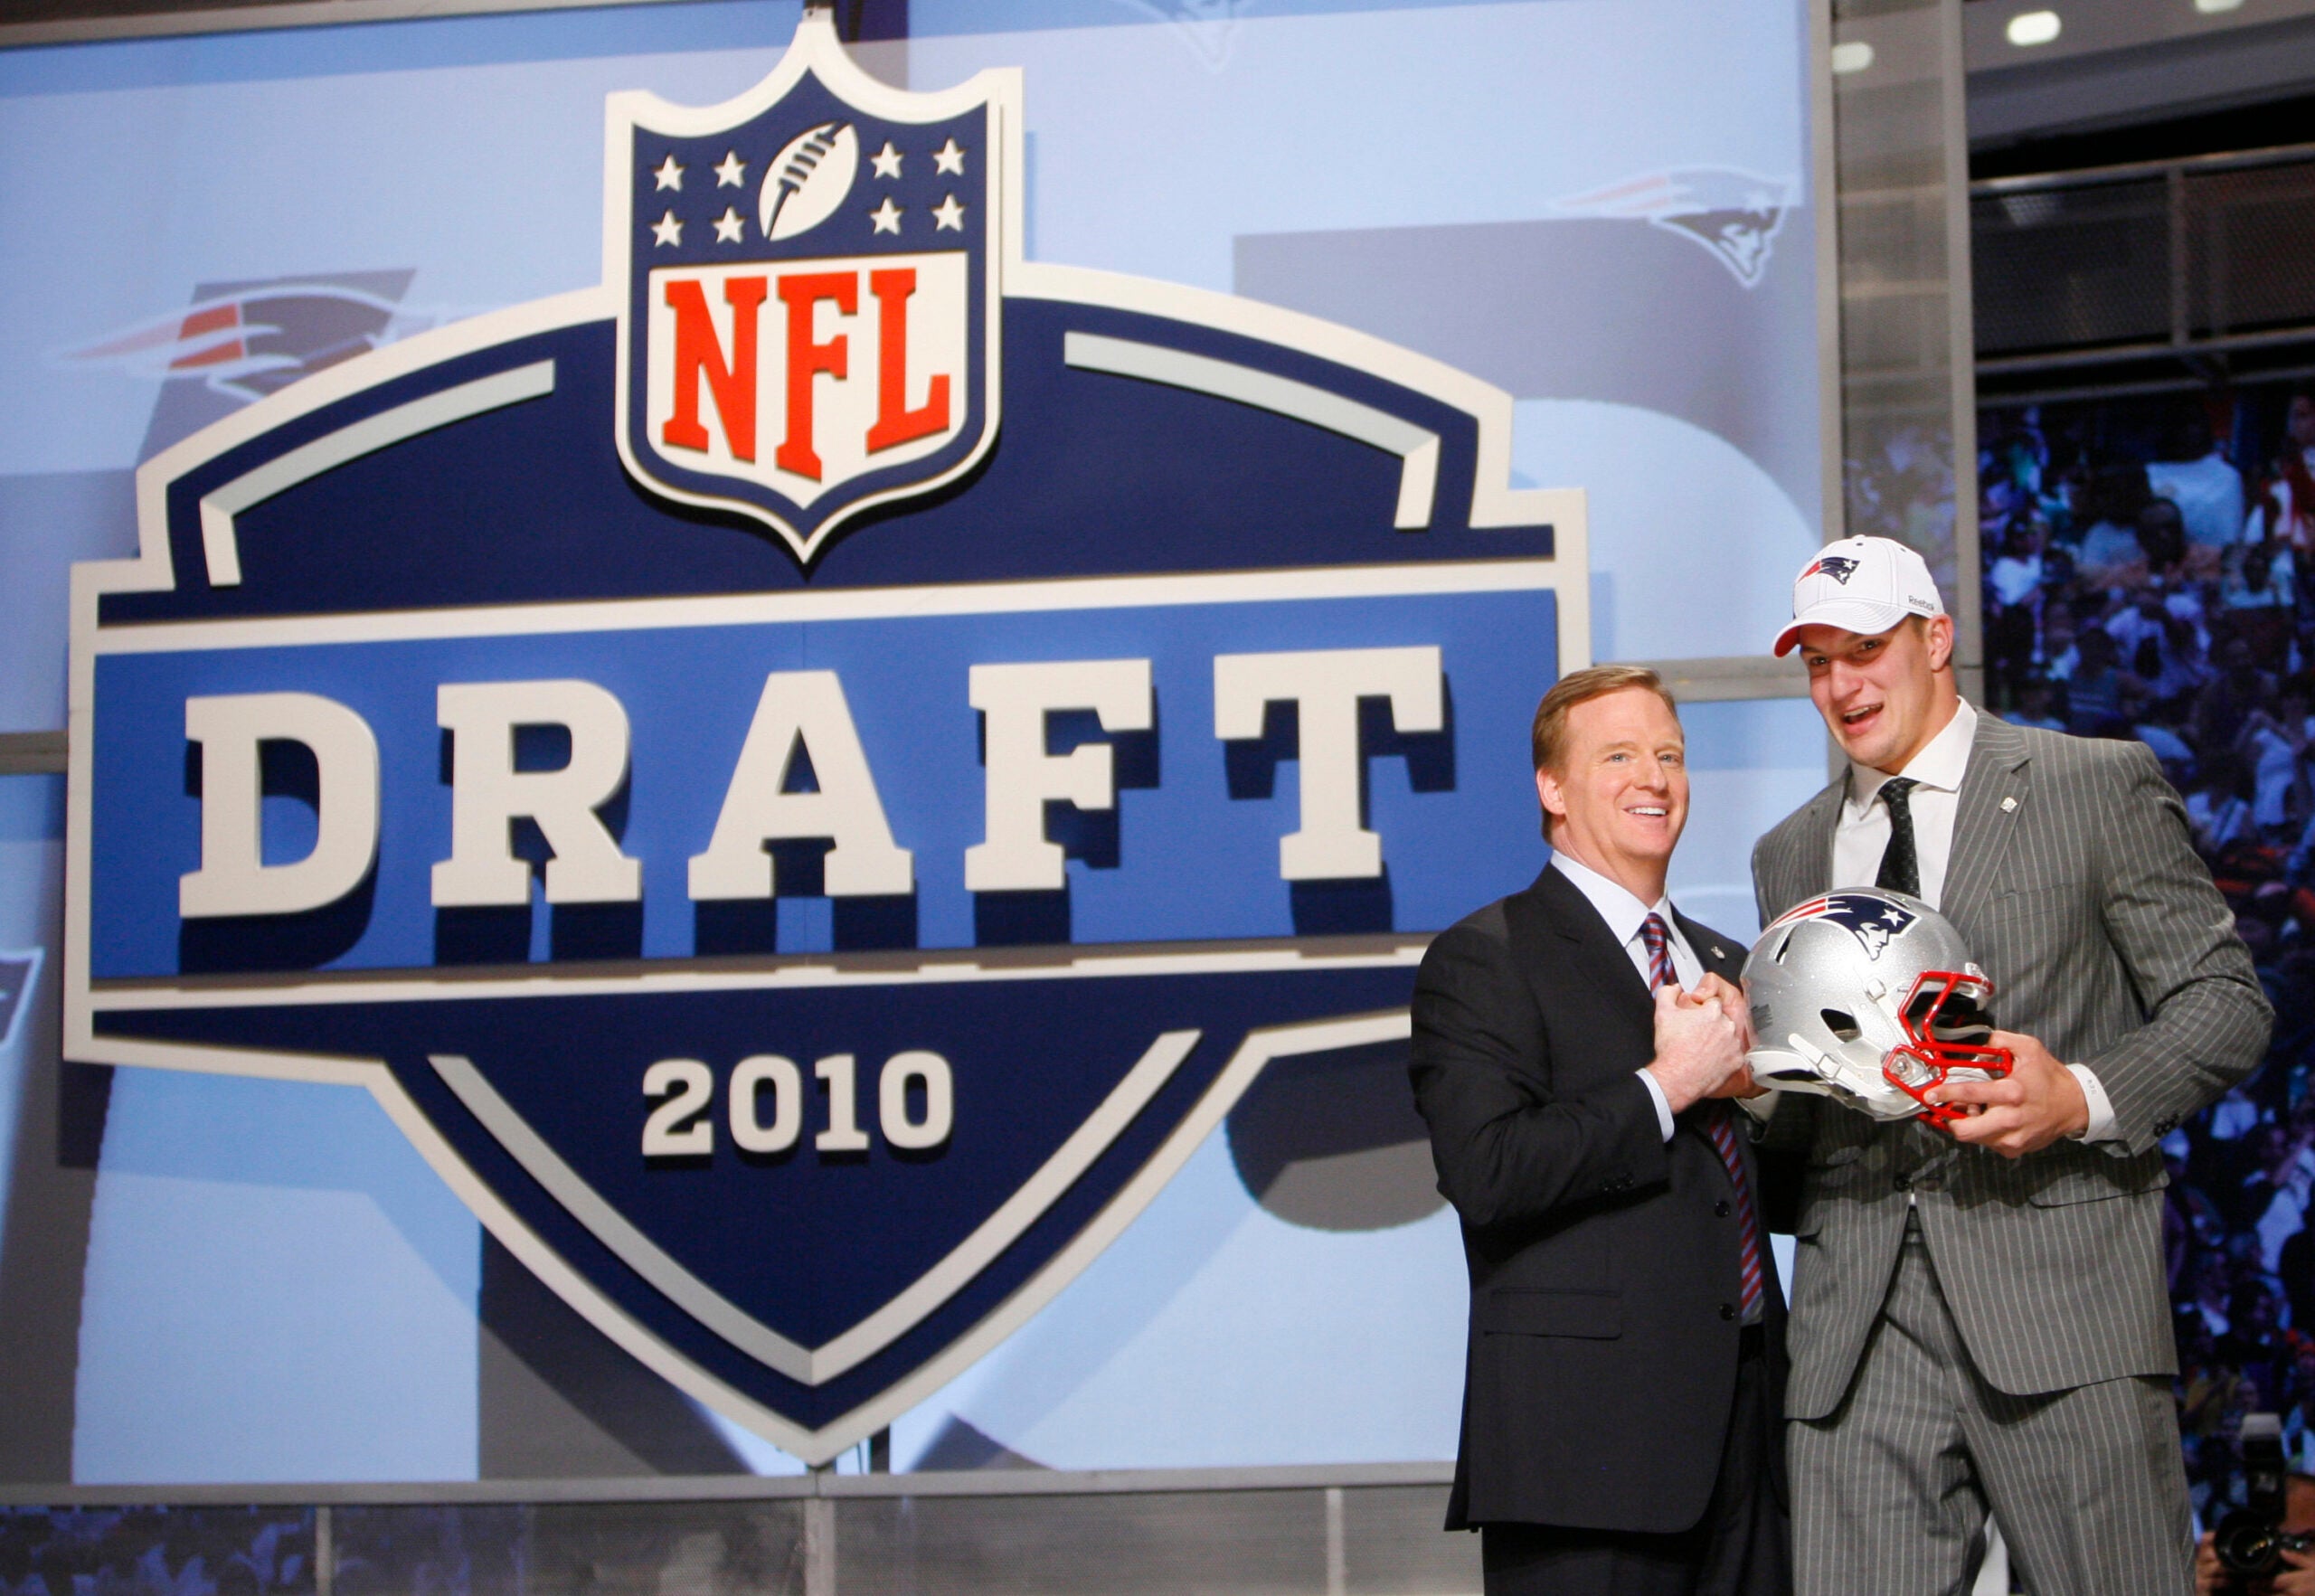 Looking back on the Patriots drafting Rob Gronkowski